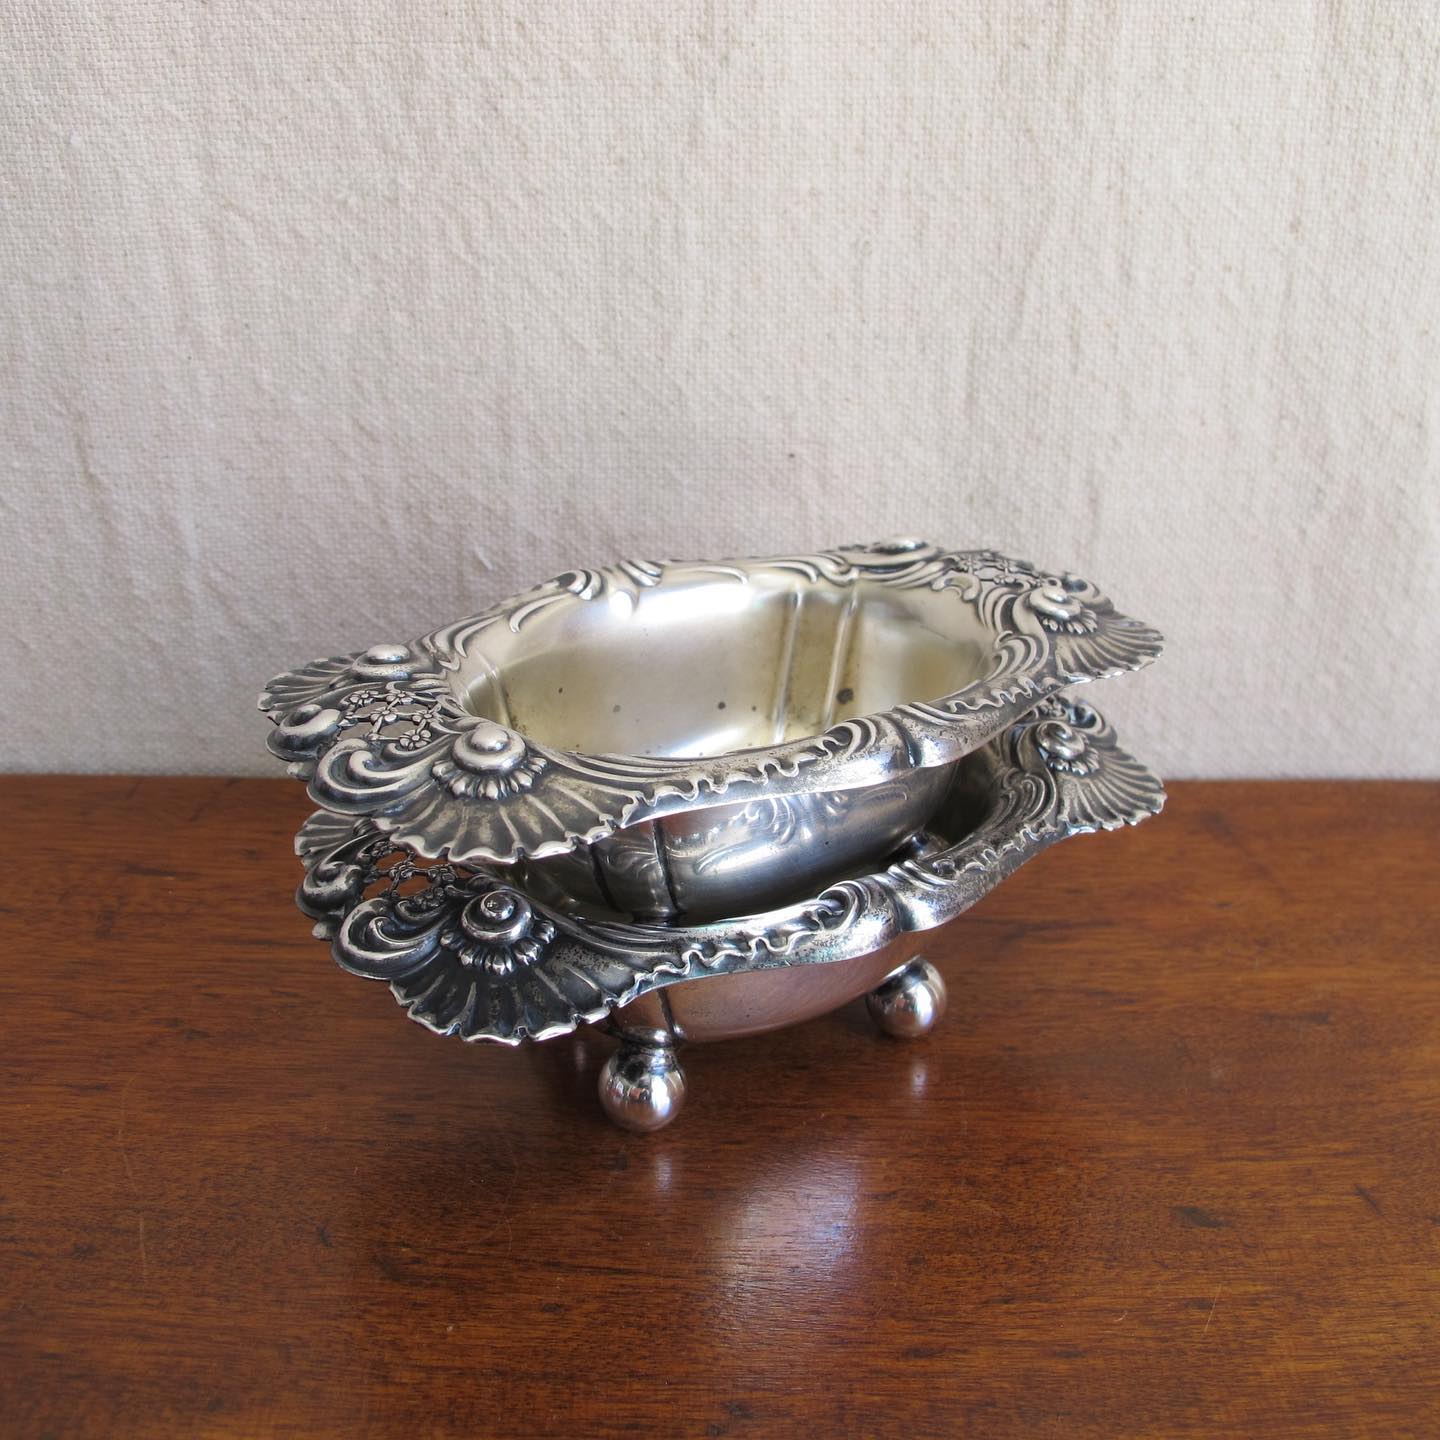 Pair of reticulated sterling silver nut dishes or salt cellars, LARGE, “Dresden” pattern by Whiting, c. 1890 1900